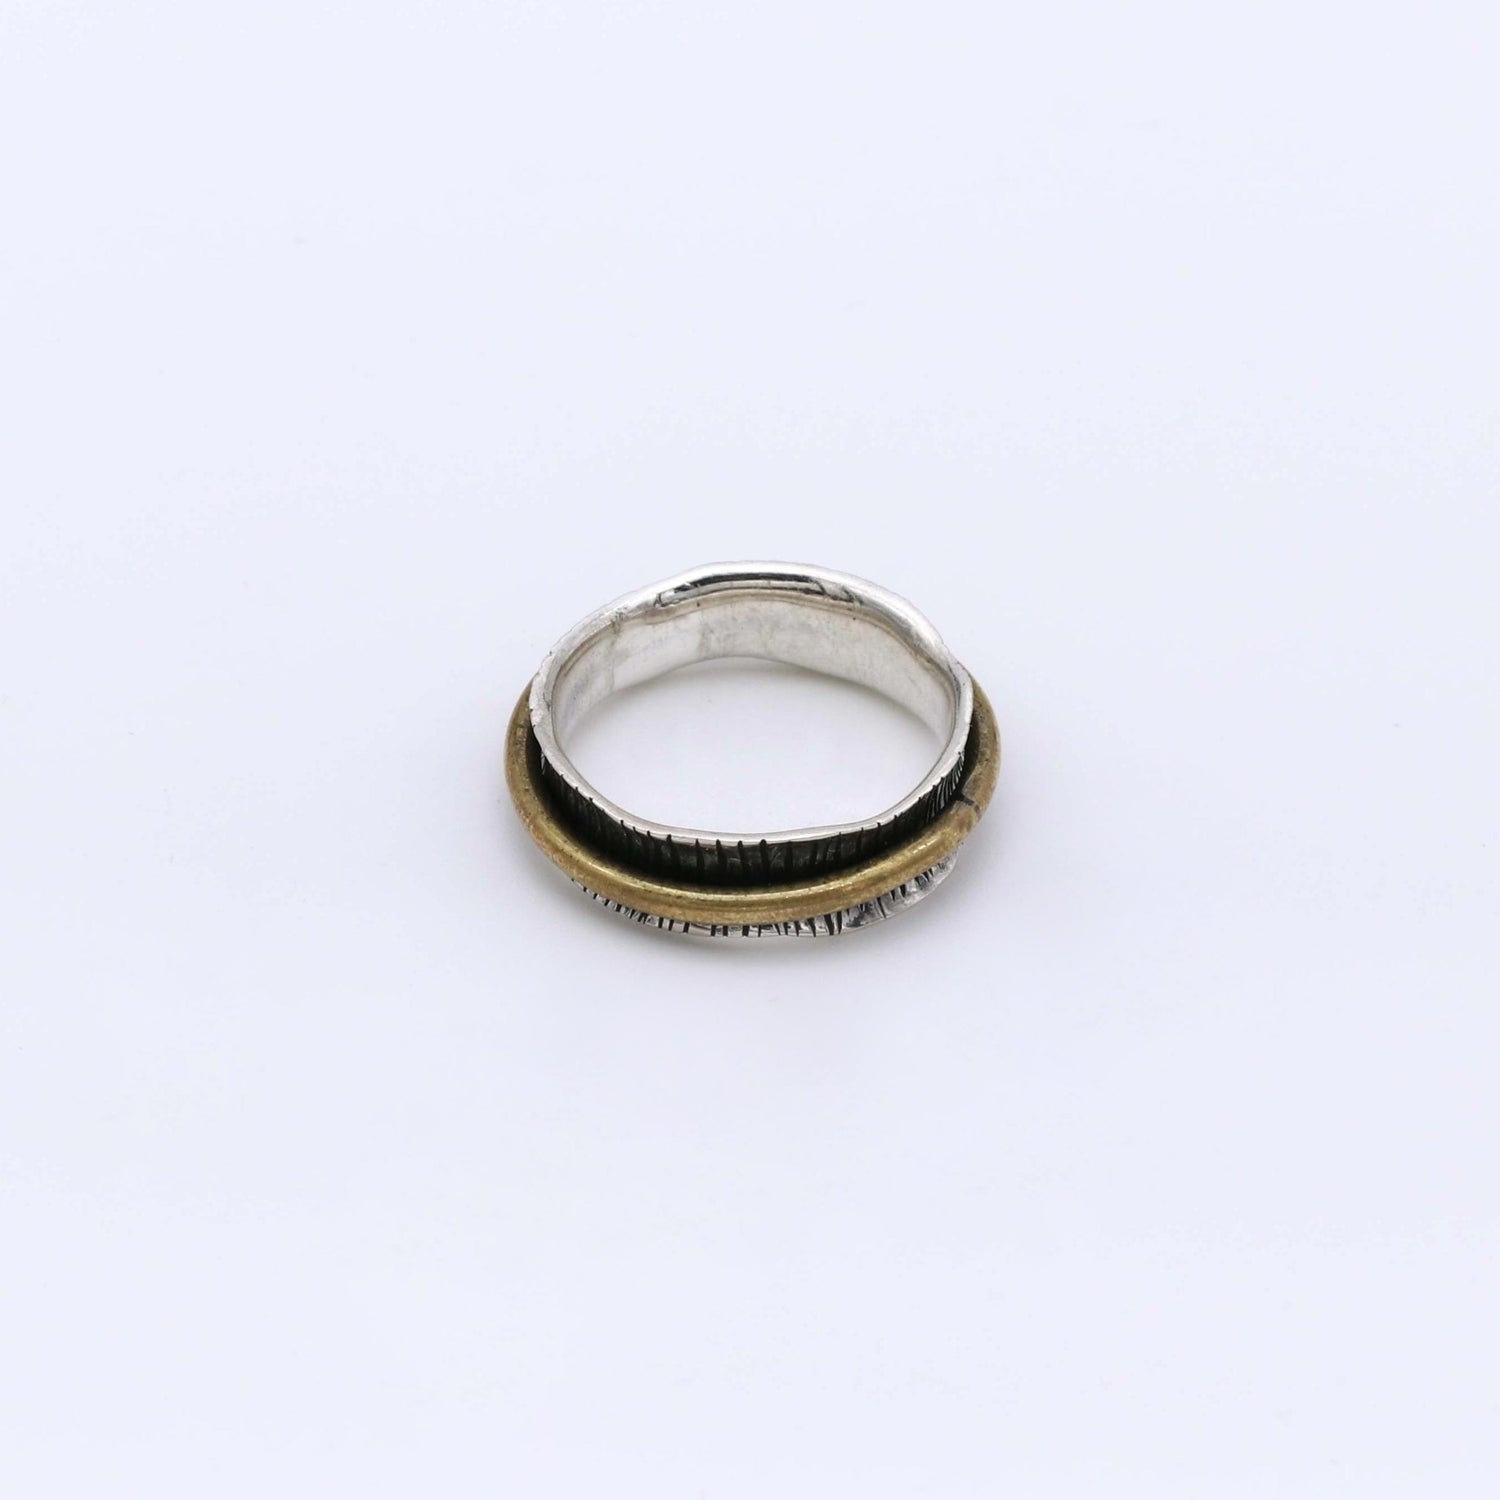 IC: ANILLO PLATA 925 Y BRONCE ANTIESTRES